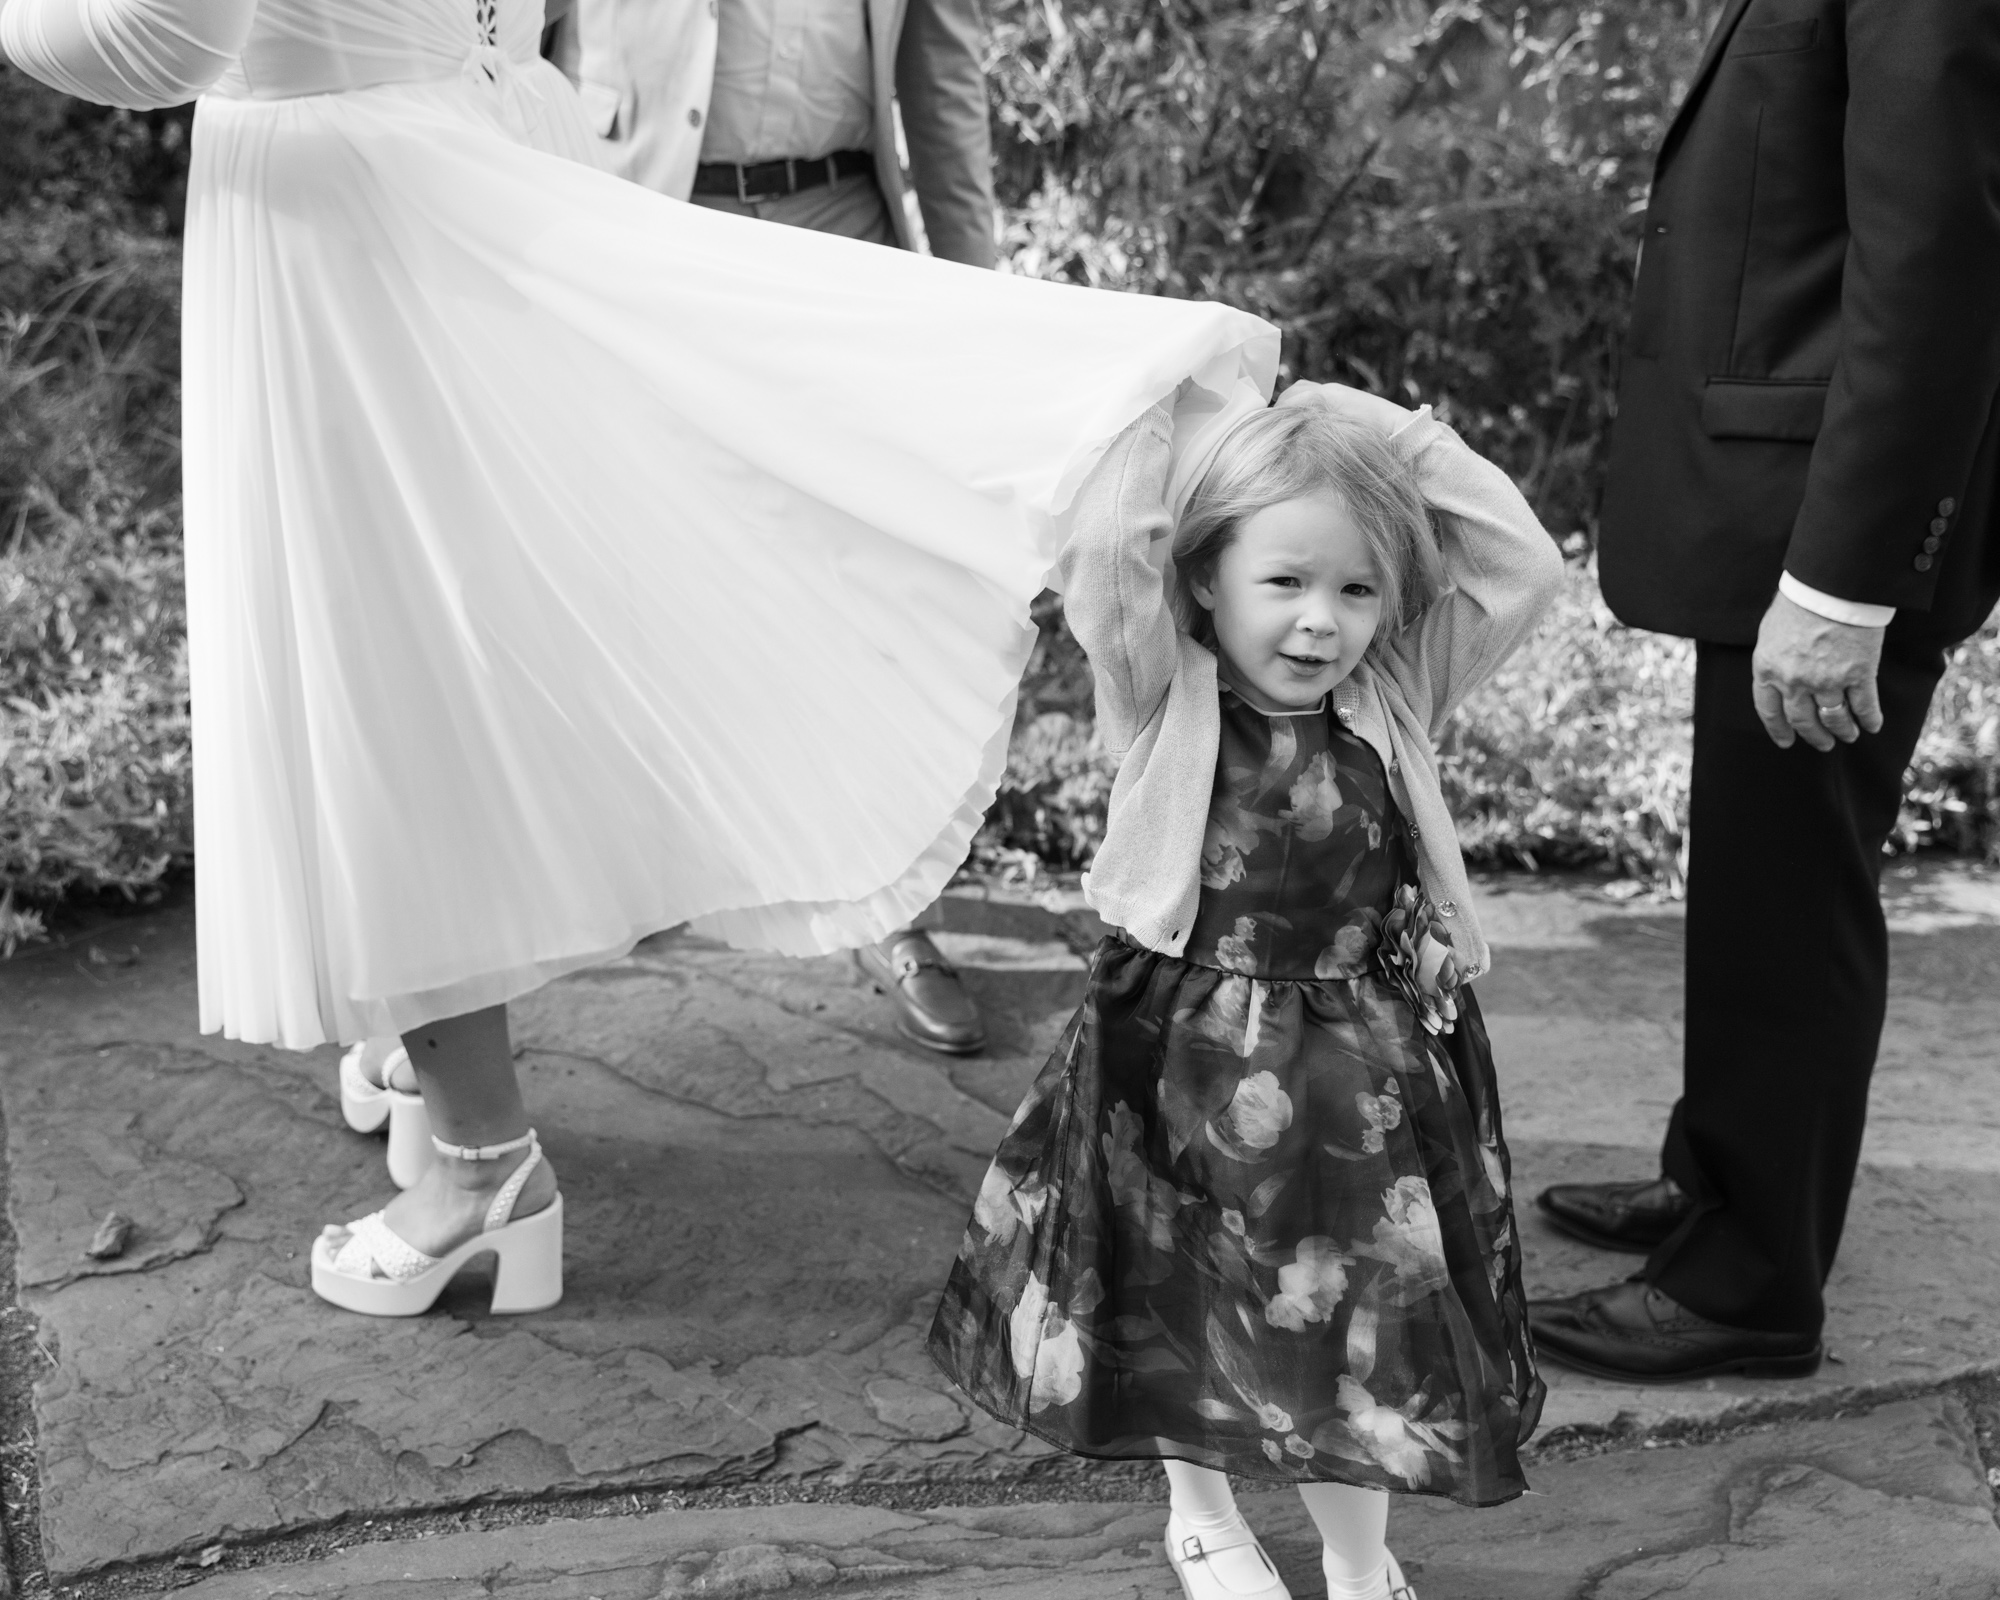 black and white candid photo of a little girl playing hide and seek with the back of a bride's chiffon skirt